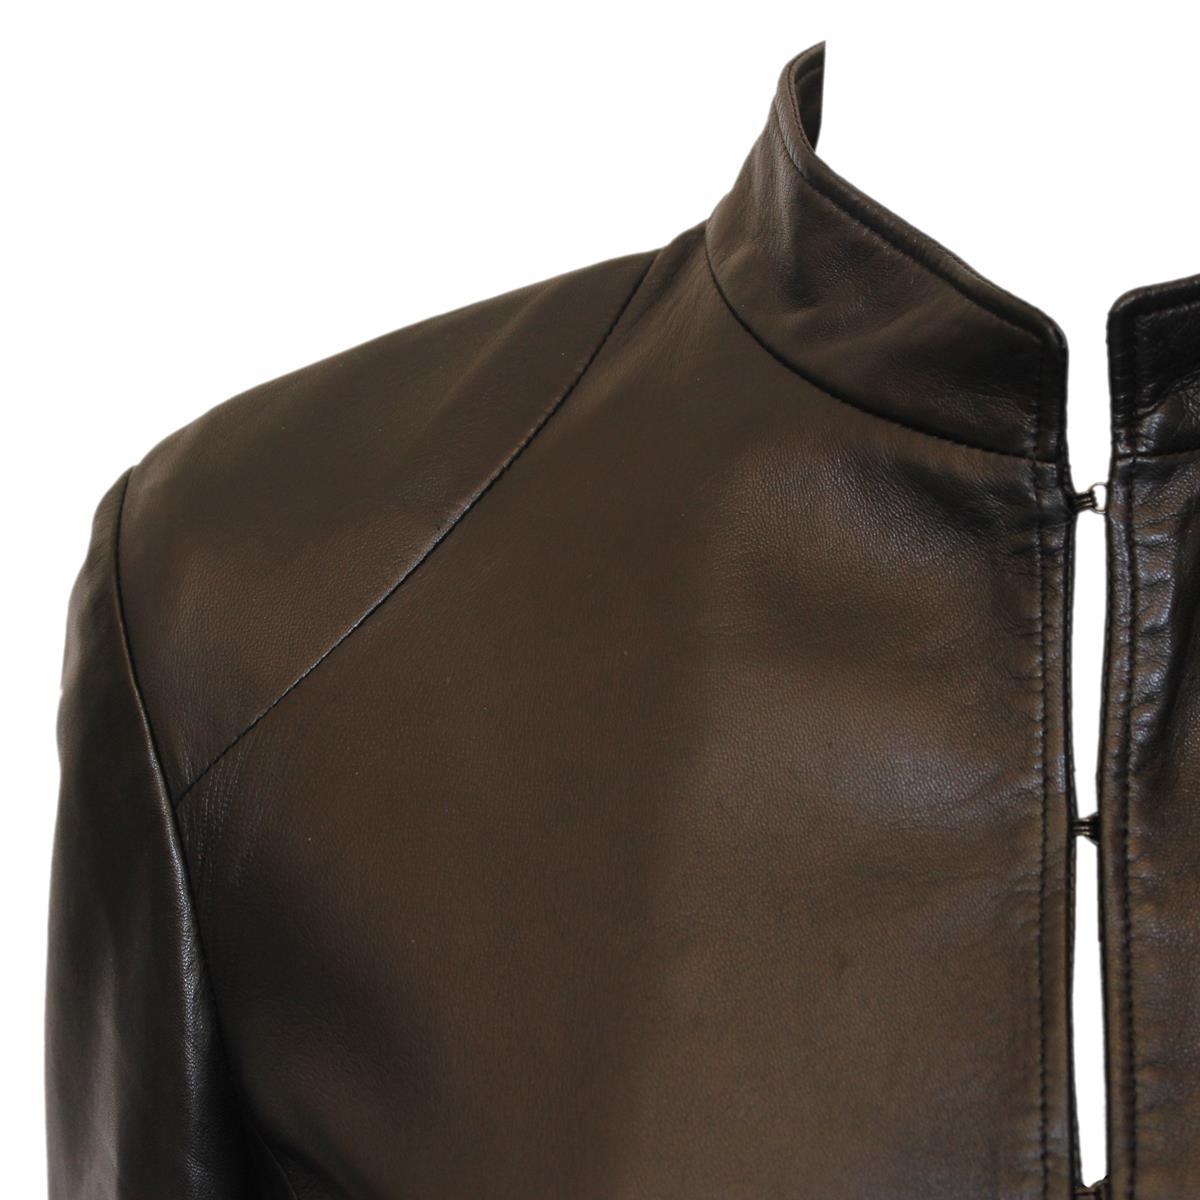 Fantastic jacket by Ruffo Research Italy
upersoft leather, nappa
Black color
